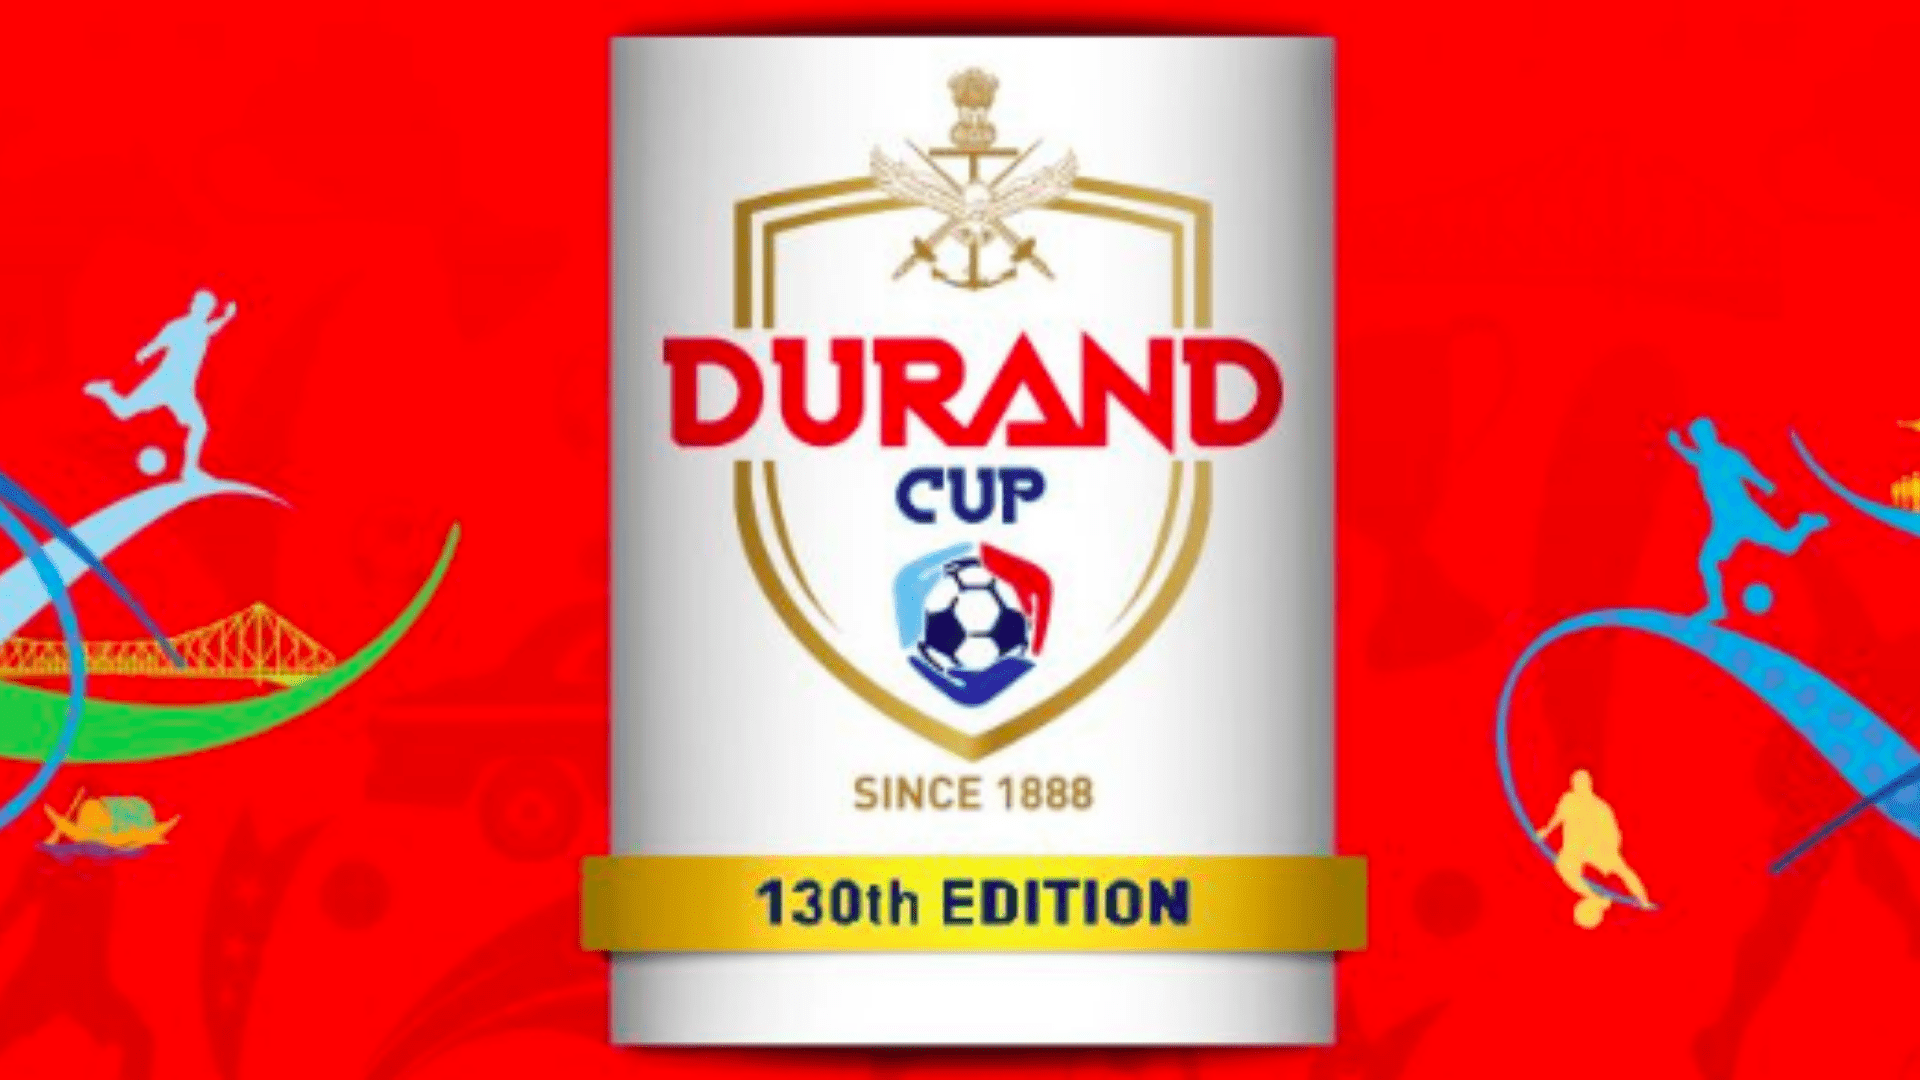 Durand Cup – Asia’s Oldest Football Tournament